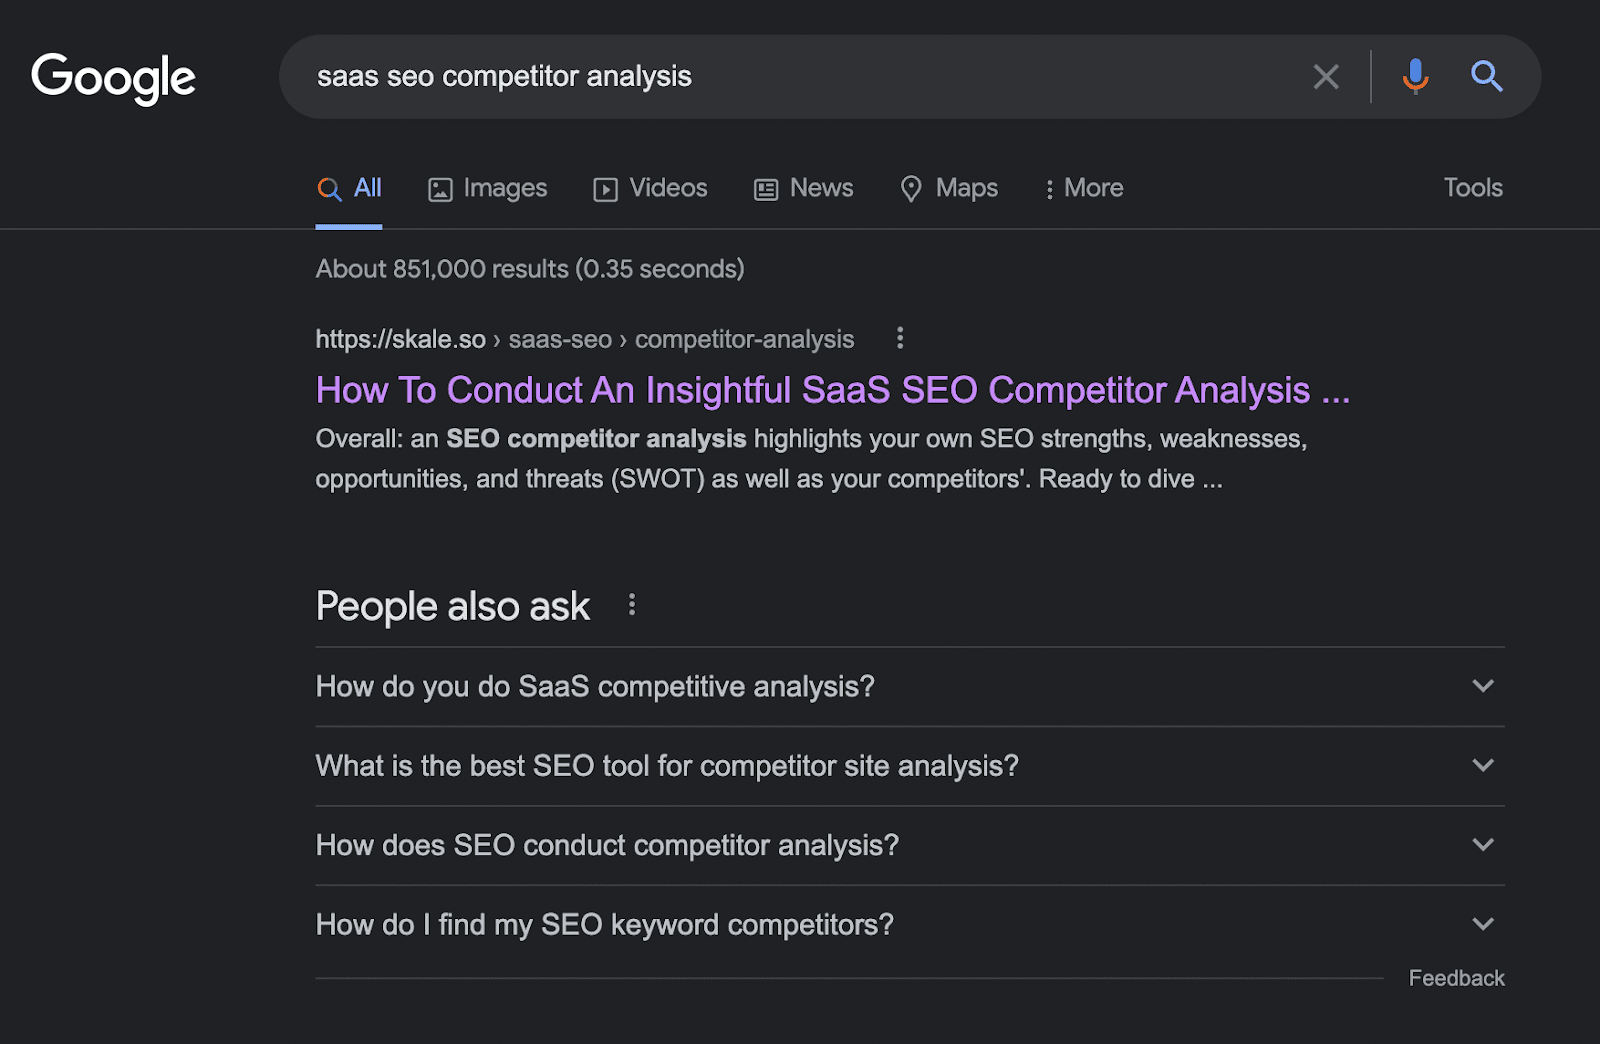 Google query for 'SaaS SEO Competitor Analysis' that shows Skale.so as the first result on the SERPs.